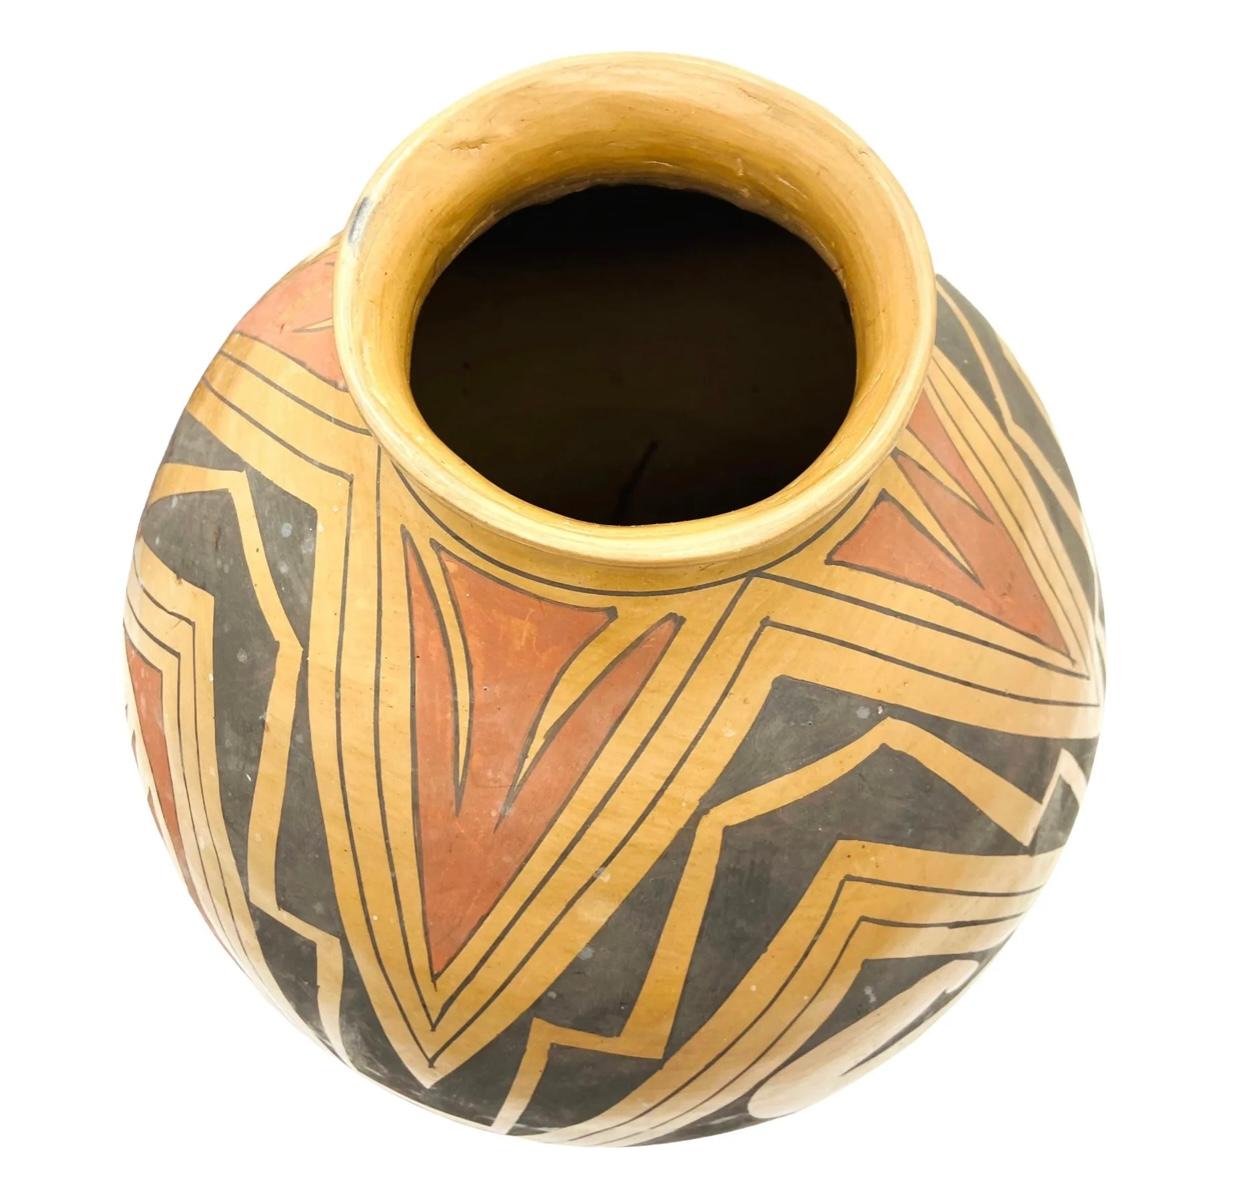 Large Jerónimo Villalpando Acoma Pottery Vase. Colors are red and black on a tan background. Signed on bottom.